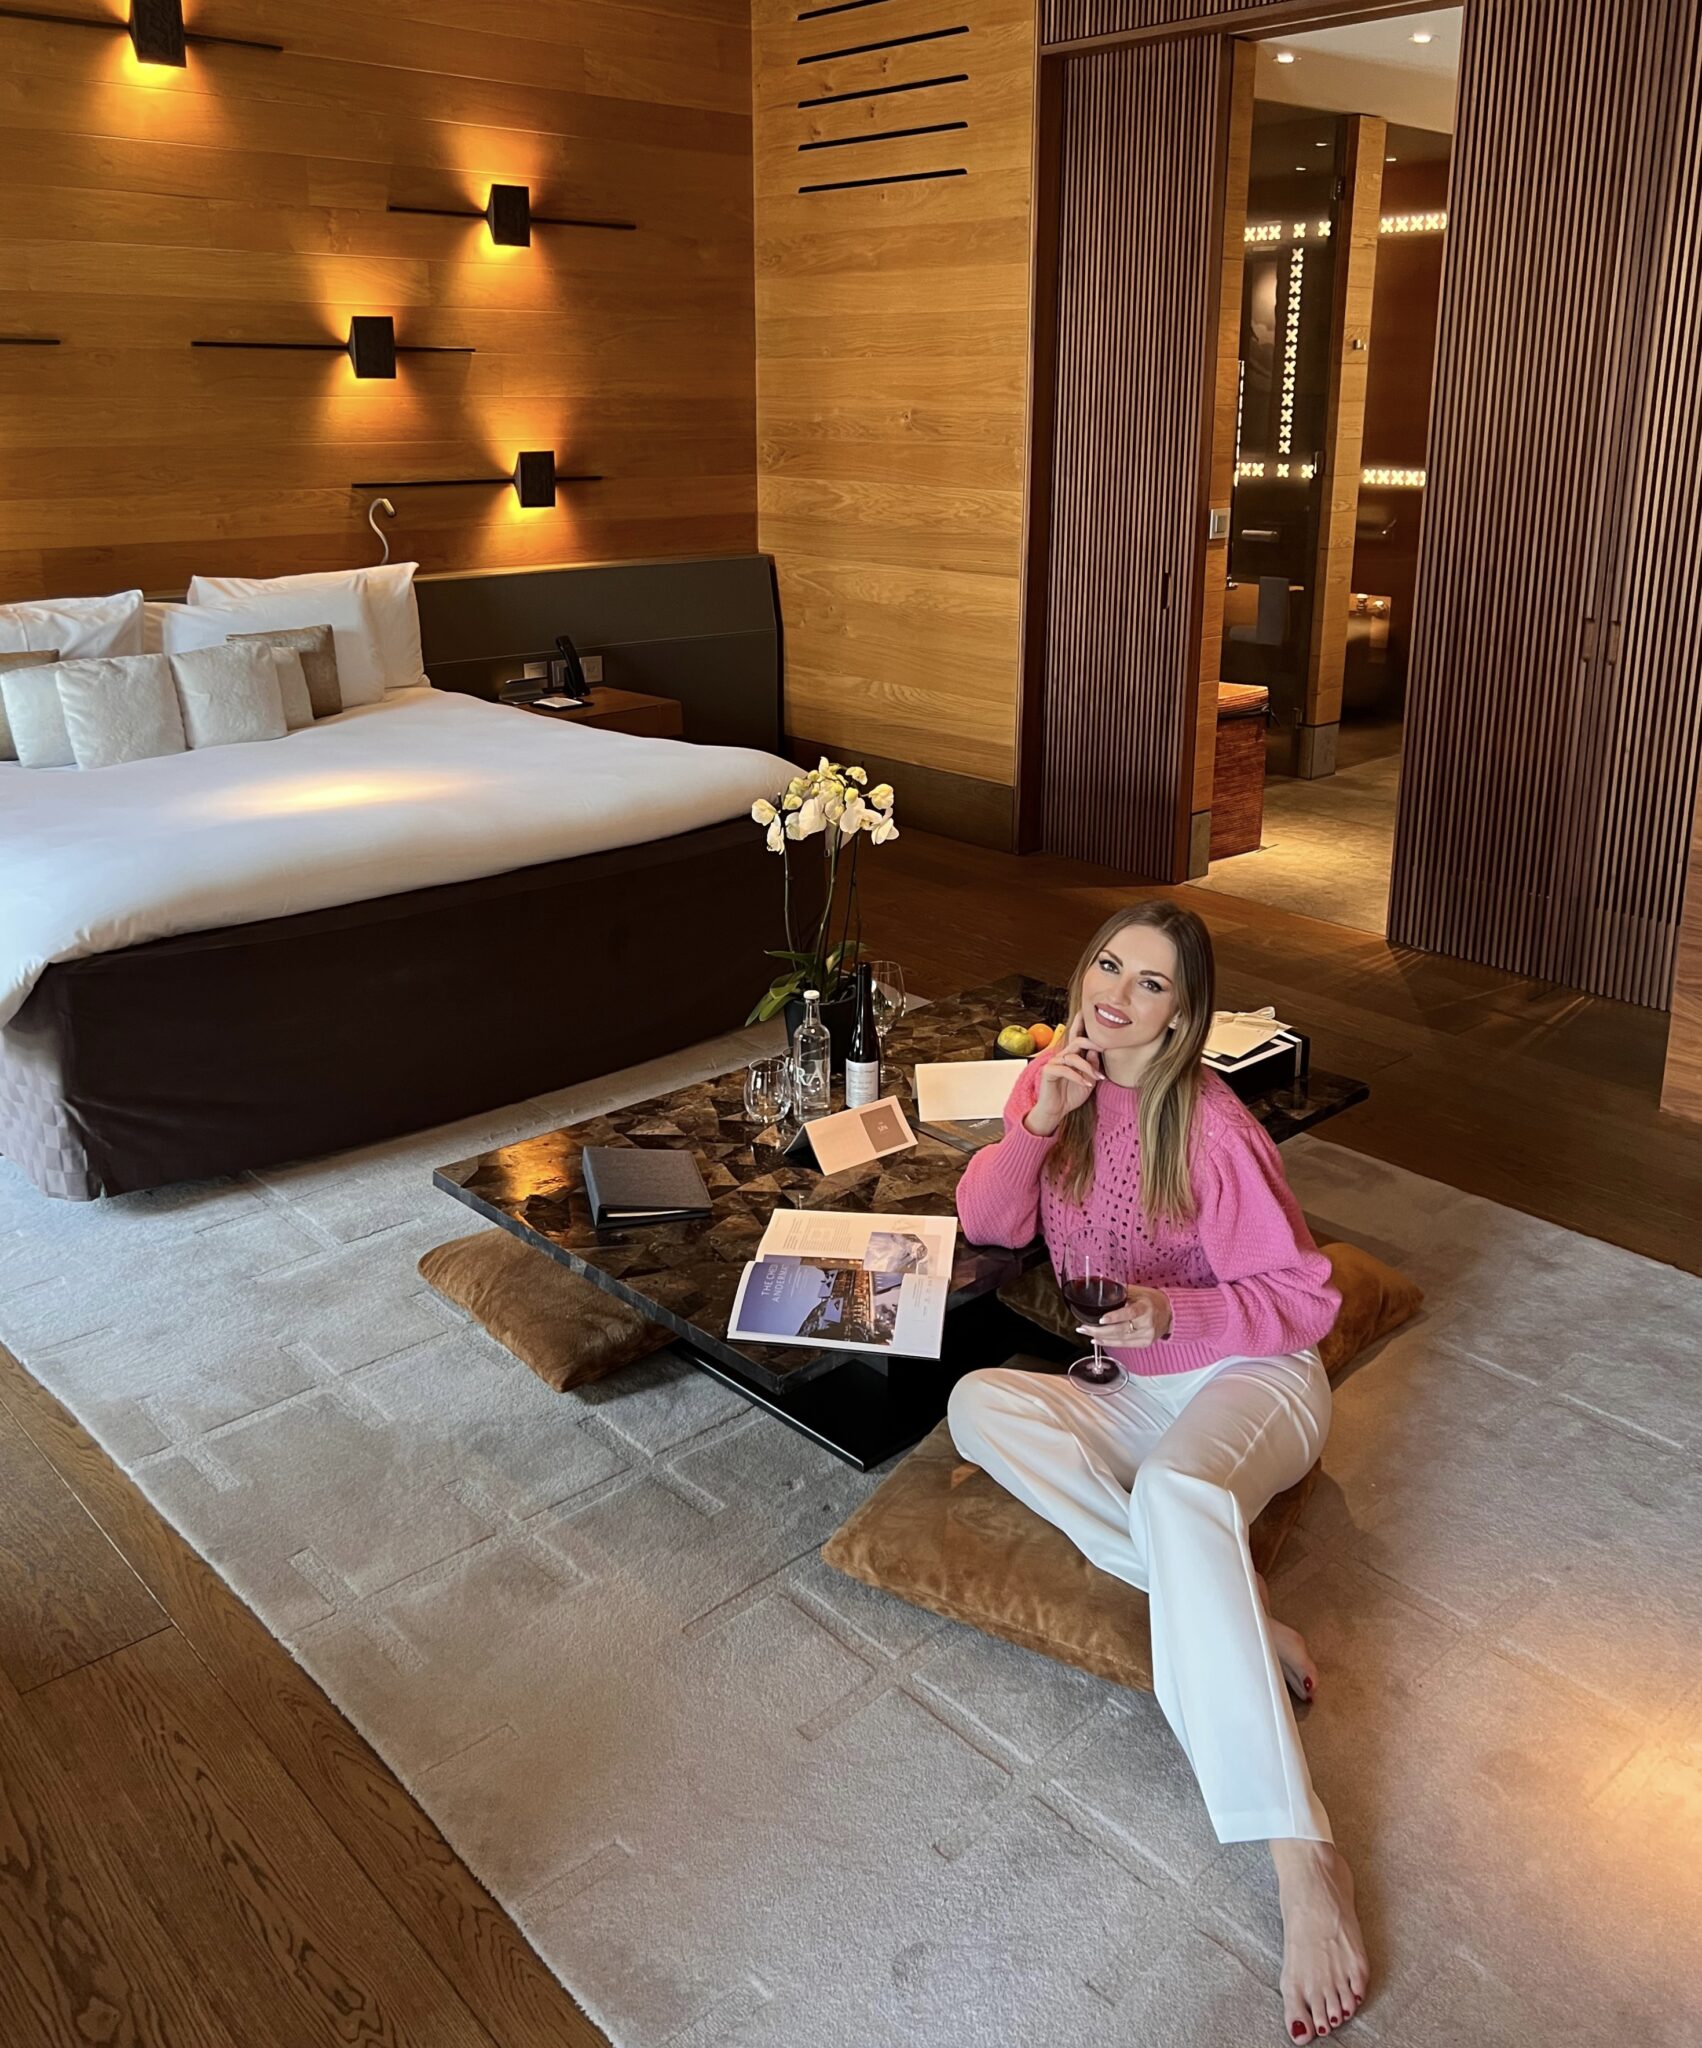 THE CHEDI ANDERMATT - Understated Luxury in the Swiss Alps. Review of The Chedi Hotel in Andermatt, number 1 in Switzerland. 11